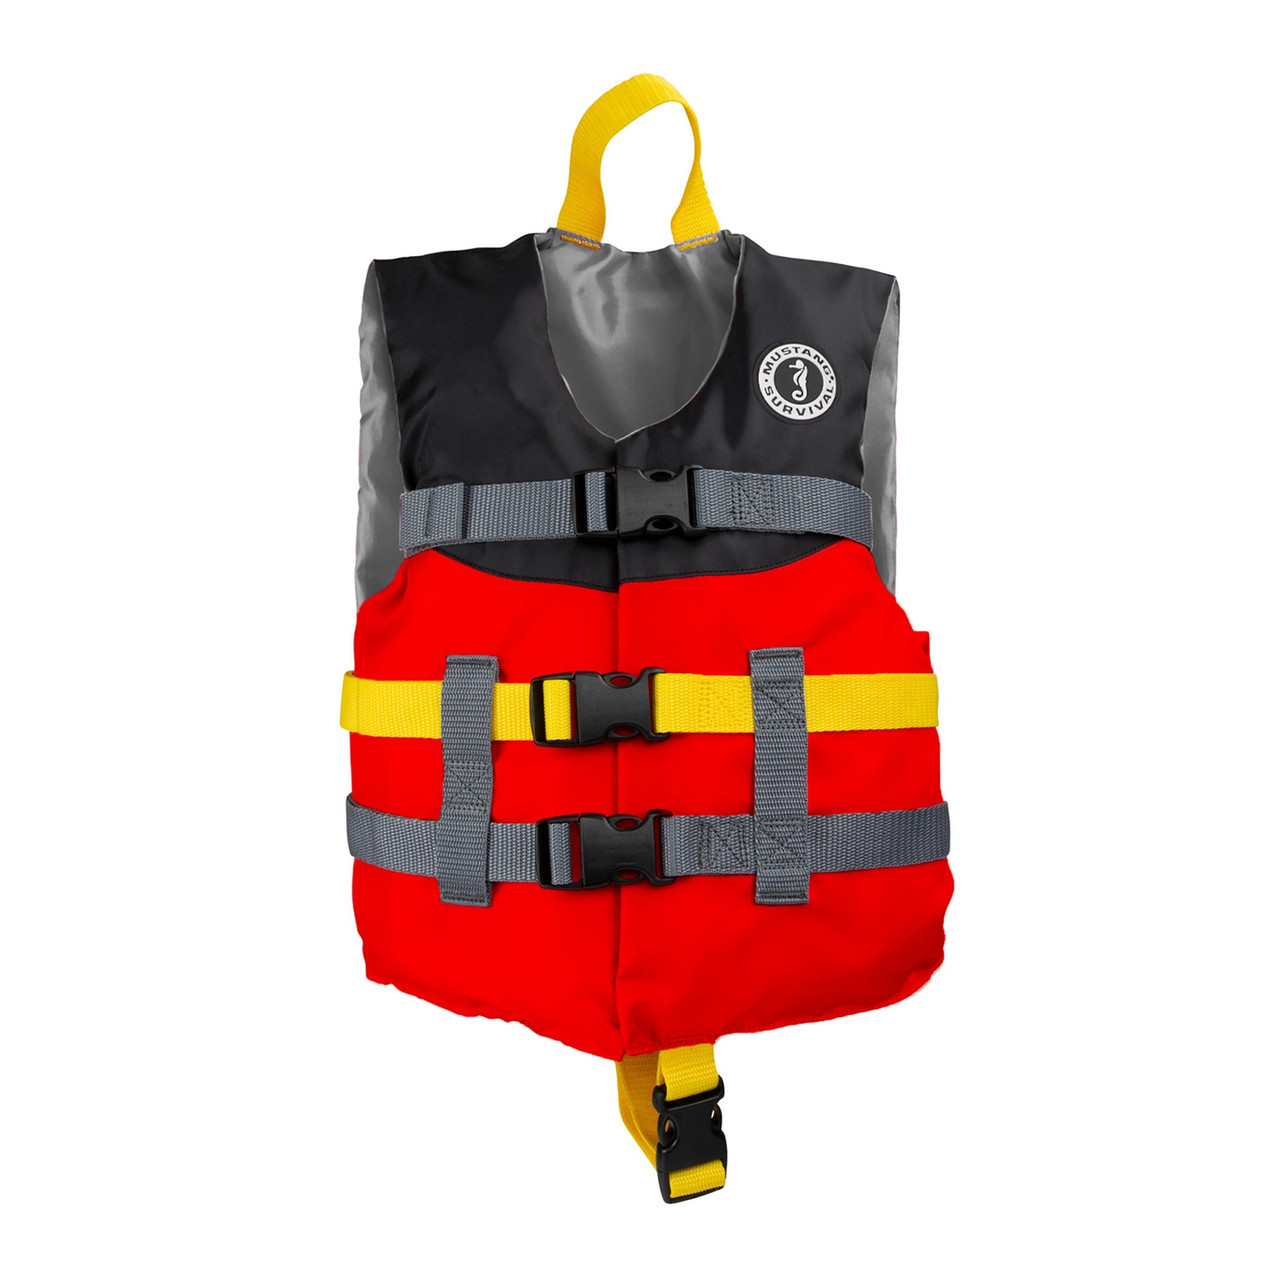 Mustang Child Livery Foam Life Vest